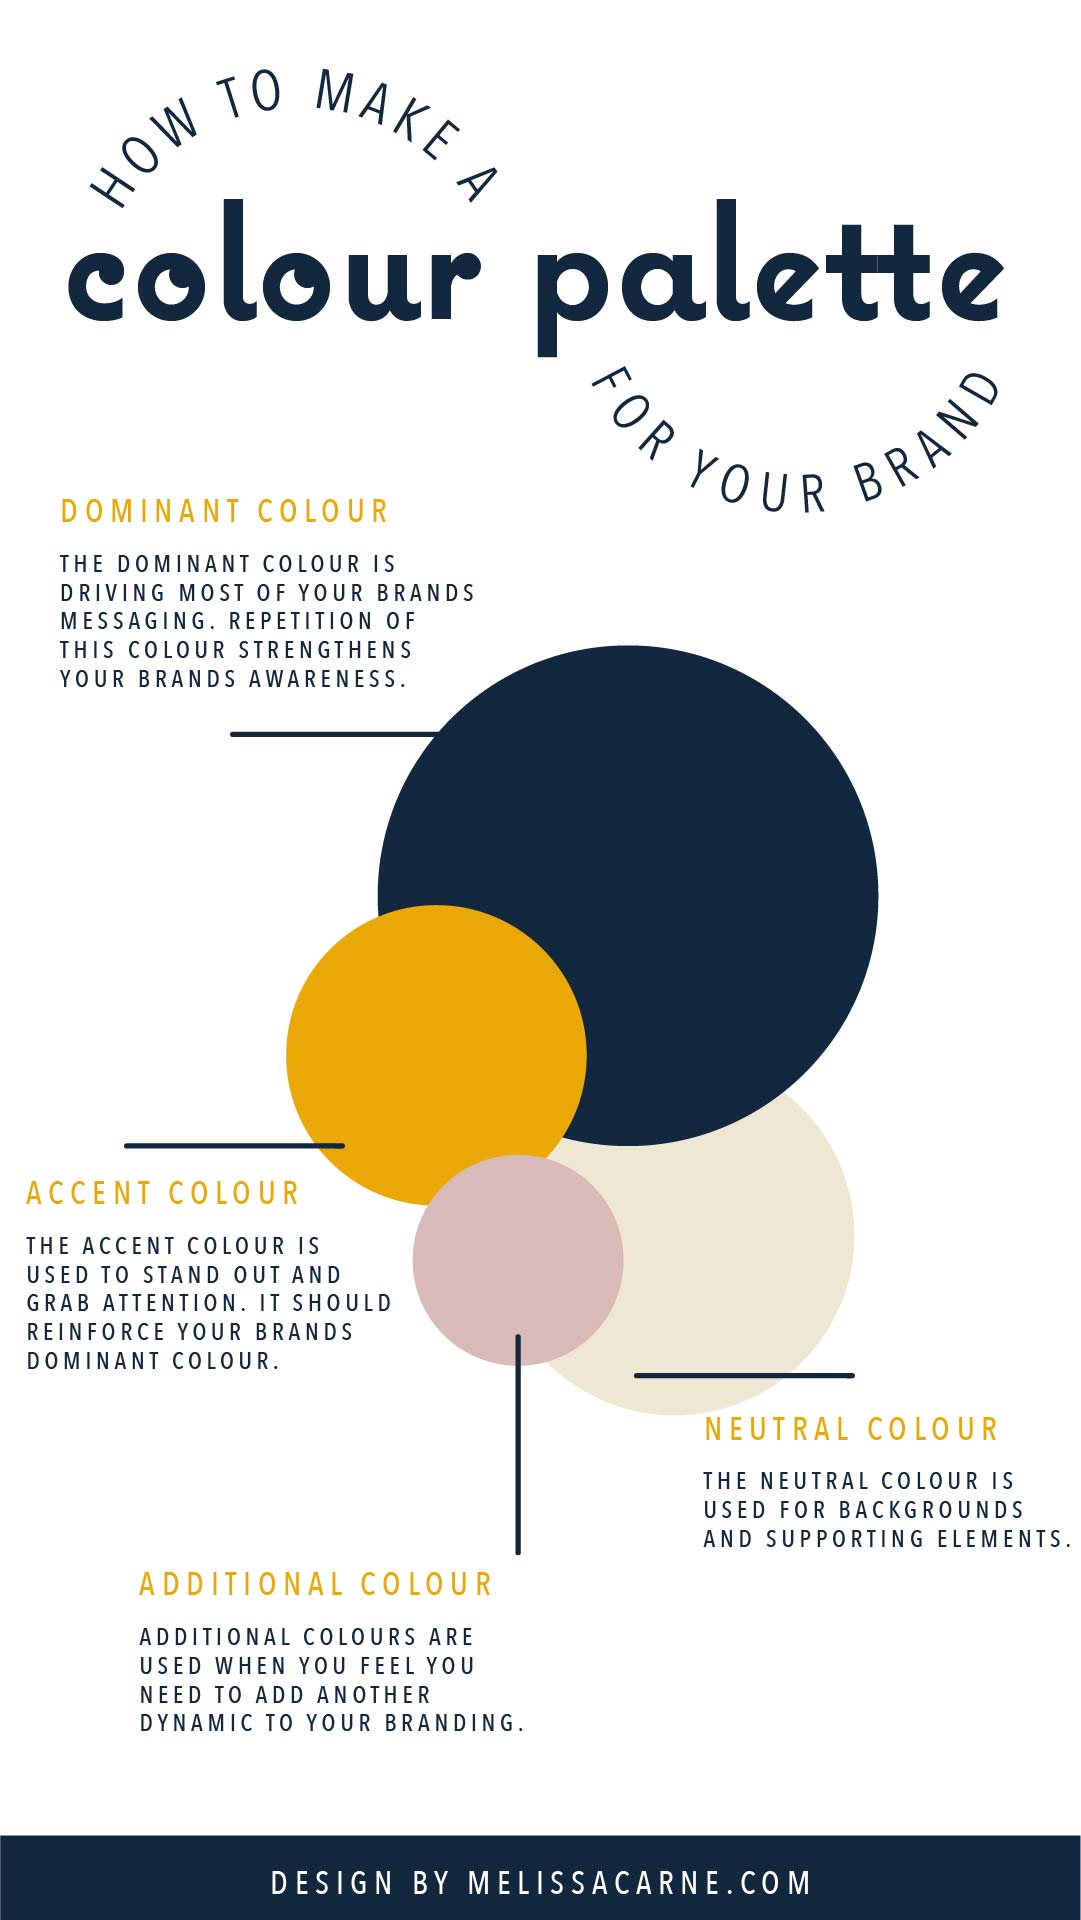 colour palette anlysis and hierarchy for your brand